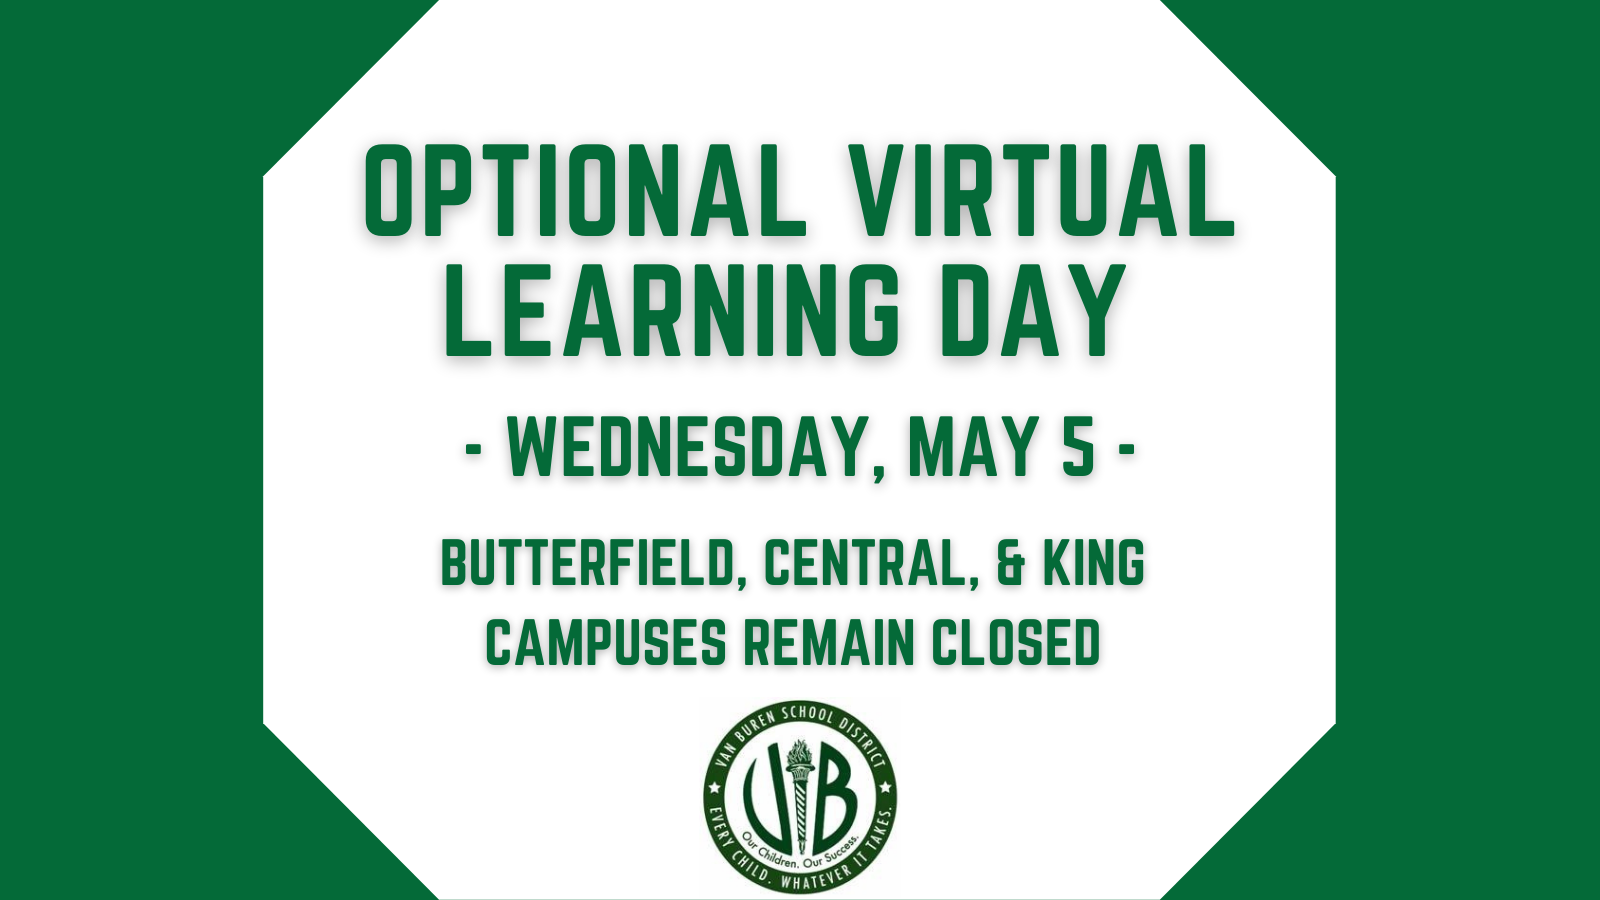 Optional Virtual Learning Day on May 5